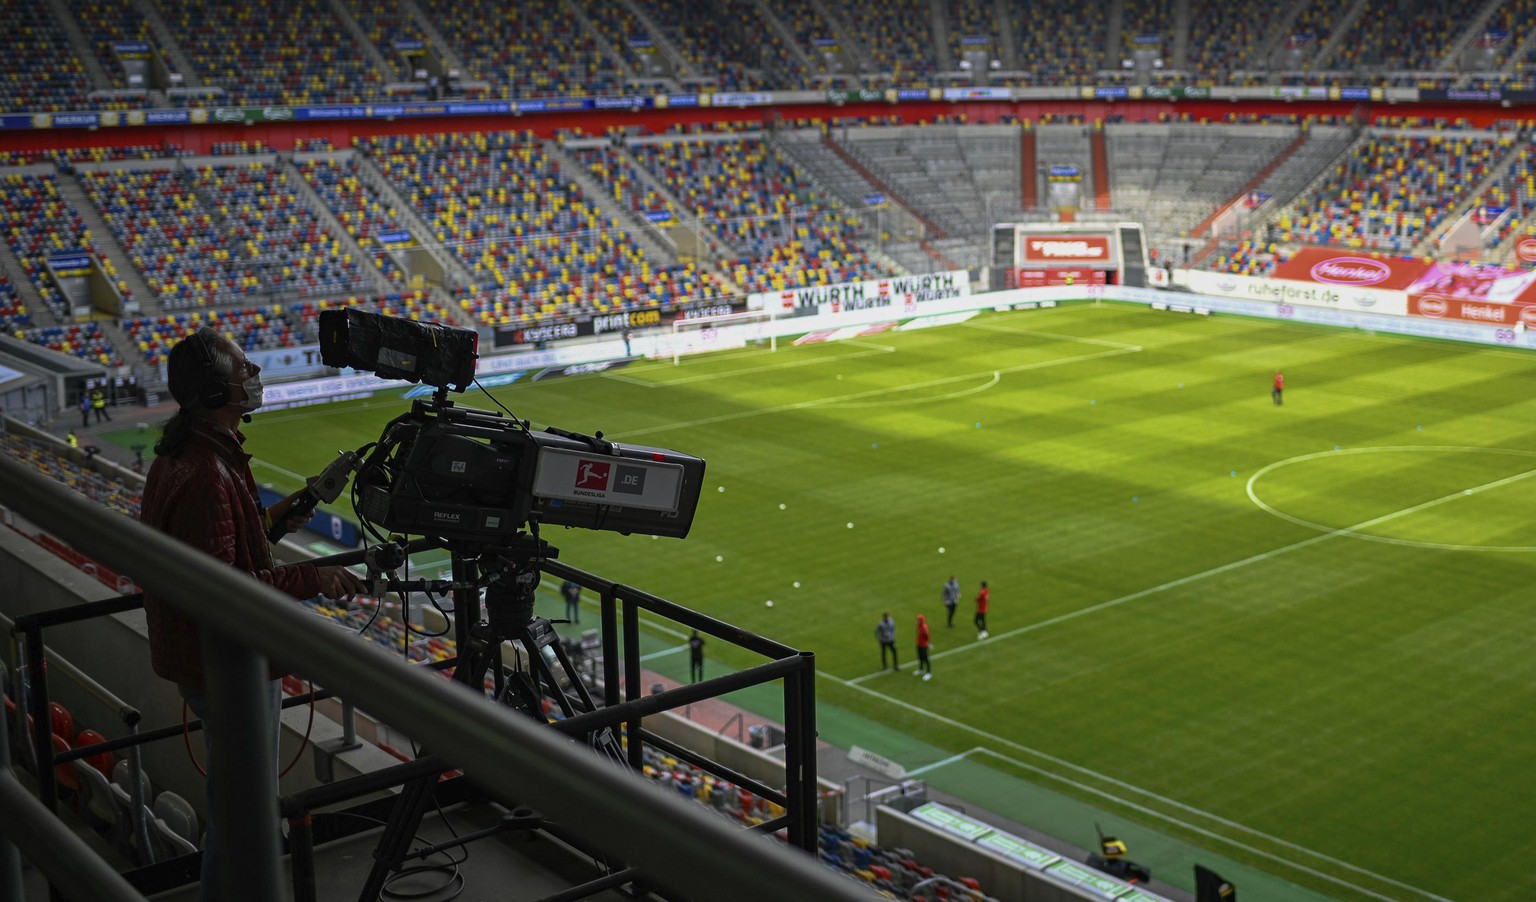 A TV camera operator works prior to the Bundesliga soccer match between Duesseldorf and Paderborn in the Merkur Spiel-Arena, Duesseldorf, Germany, Saturday, May 16, 2020. The German Bundesliga becomes ...